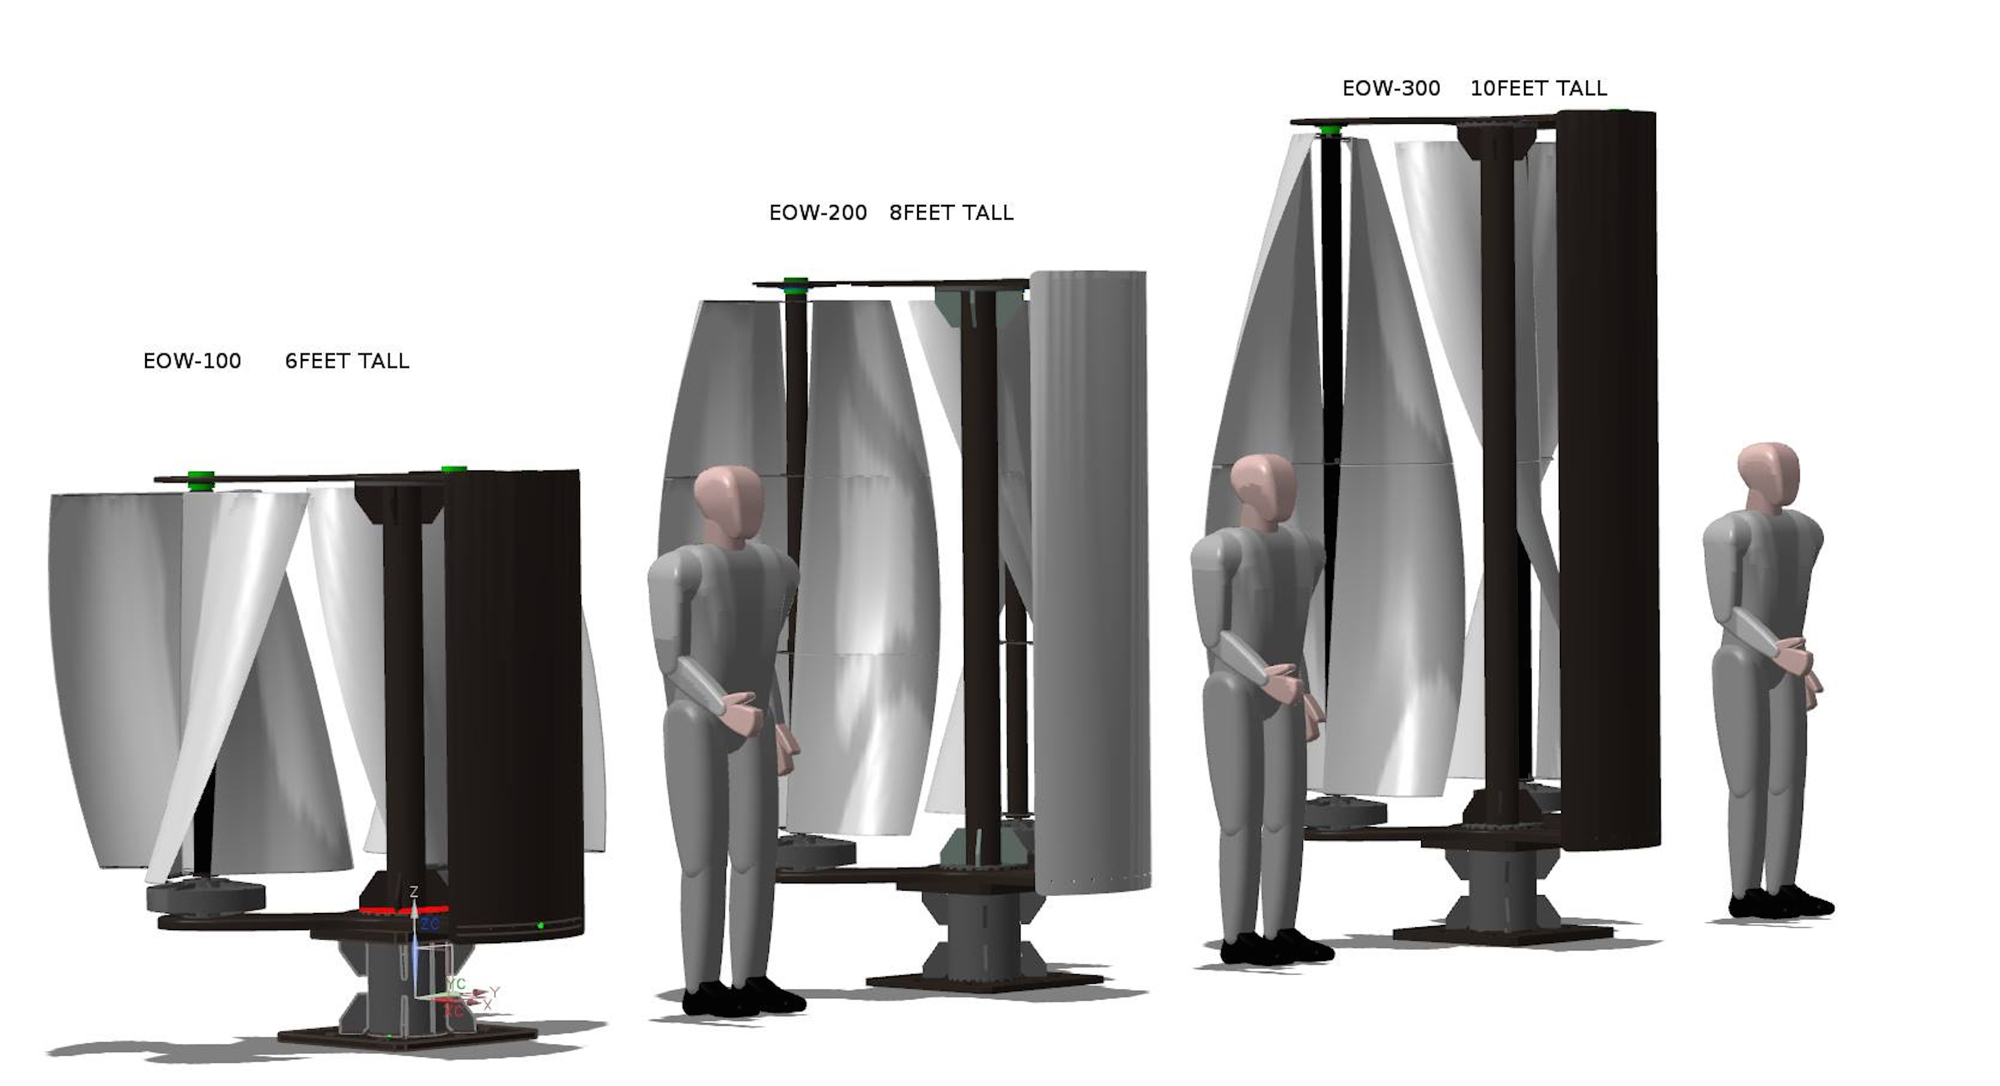 BE-Wind’s product is an urban vertical dual-axis turbine, designed to generate usable power virtually anywhere.